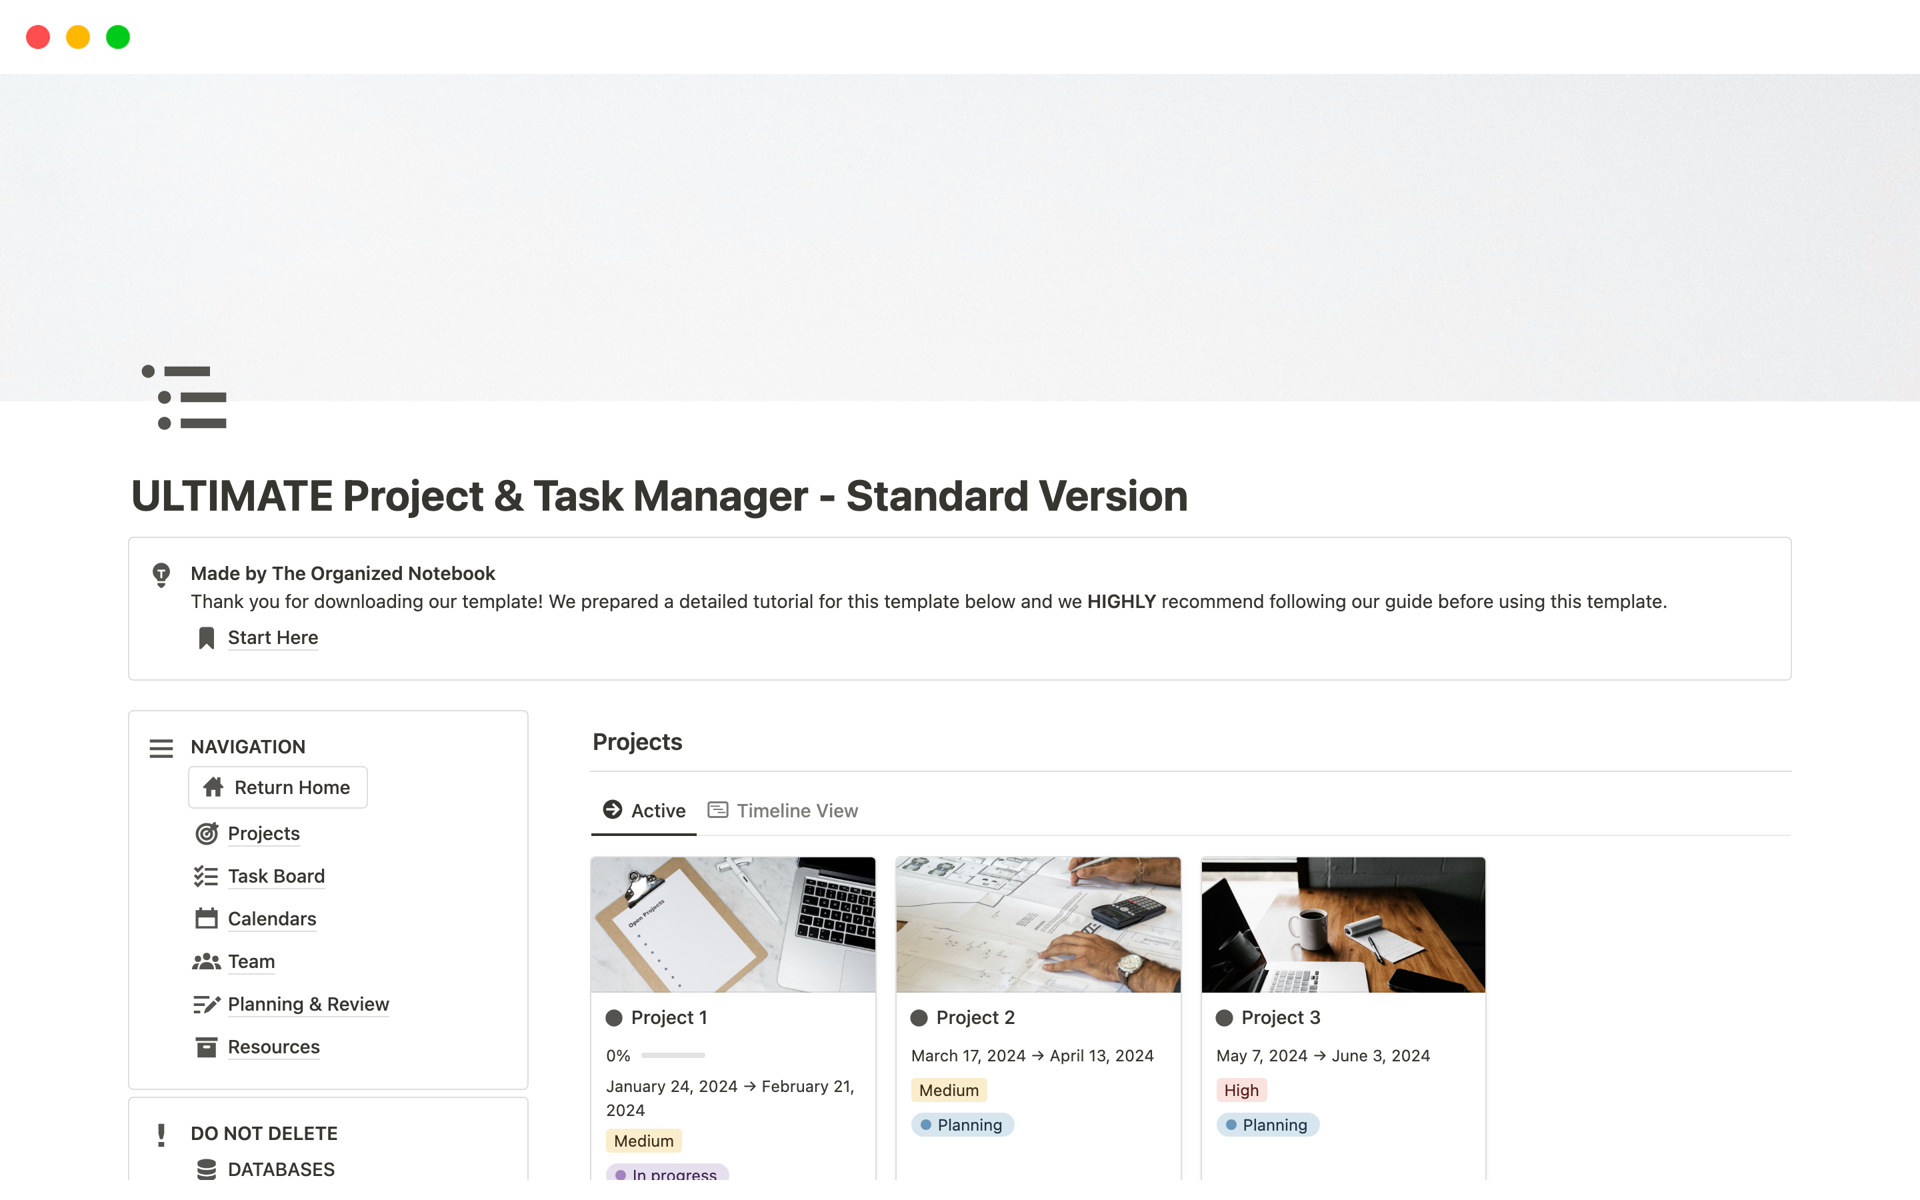 Are you interested in the ULTIMATE project and task manager? This template is designed in a way that you can go seamlessly from projects, tasks to sub-tasks. We also include additional features for planning and review, team pages, calendars, and more!